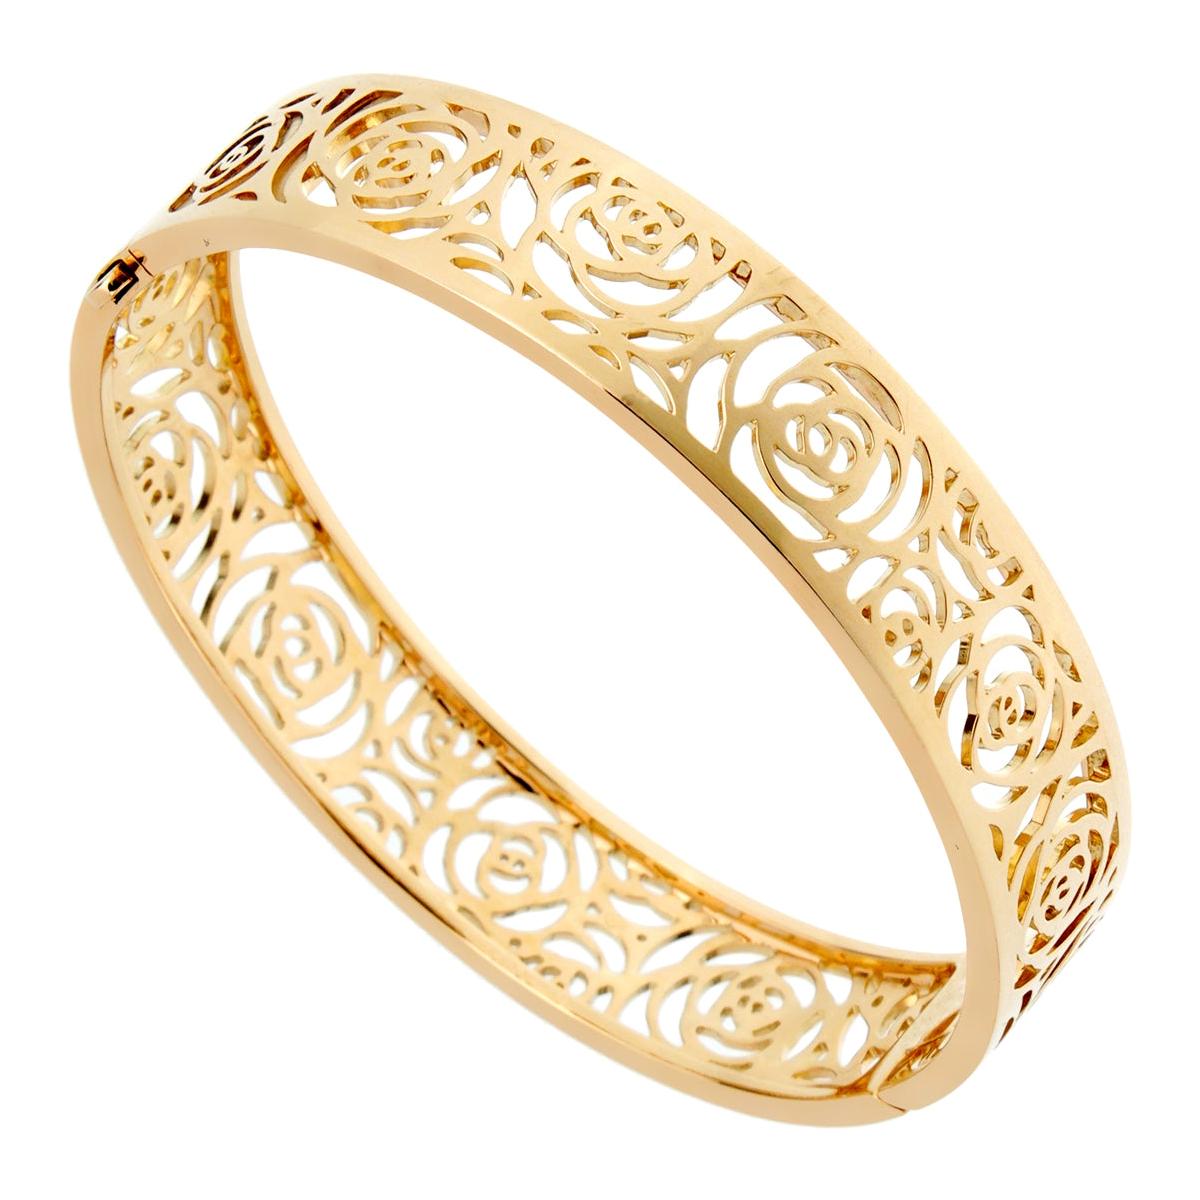 The Camellia, Gabrielle Chanel’s favorite flower, is the inspiration for this exquisite bangle from the Chanel Camellia collection. A polished 18k yellow gold flower motif flows through the entire length of the bangle.

Width: 1/2